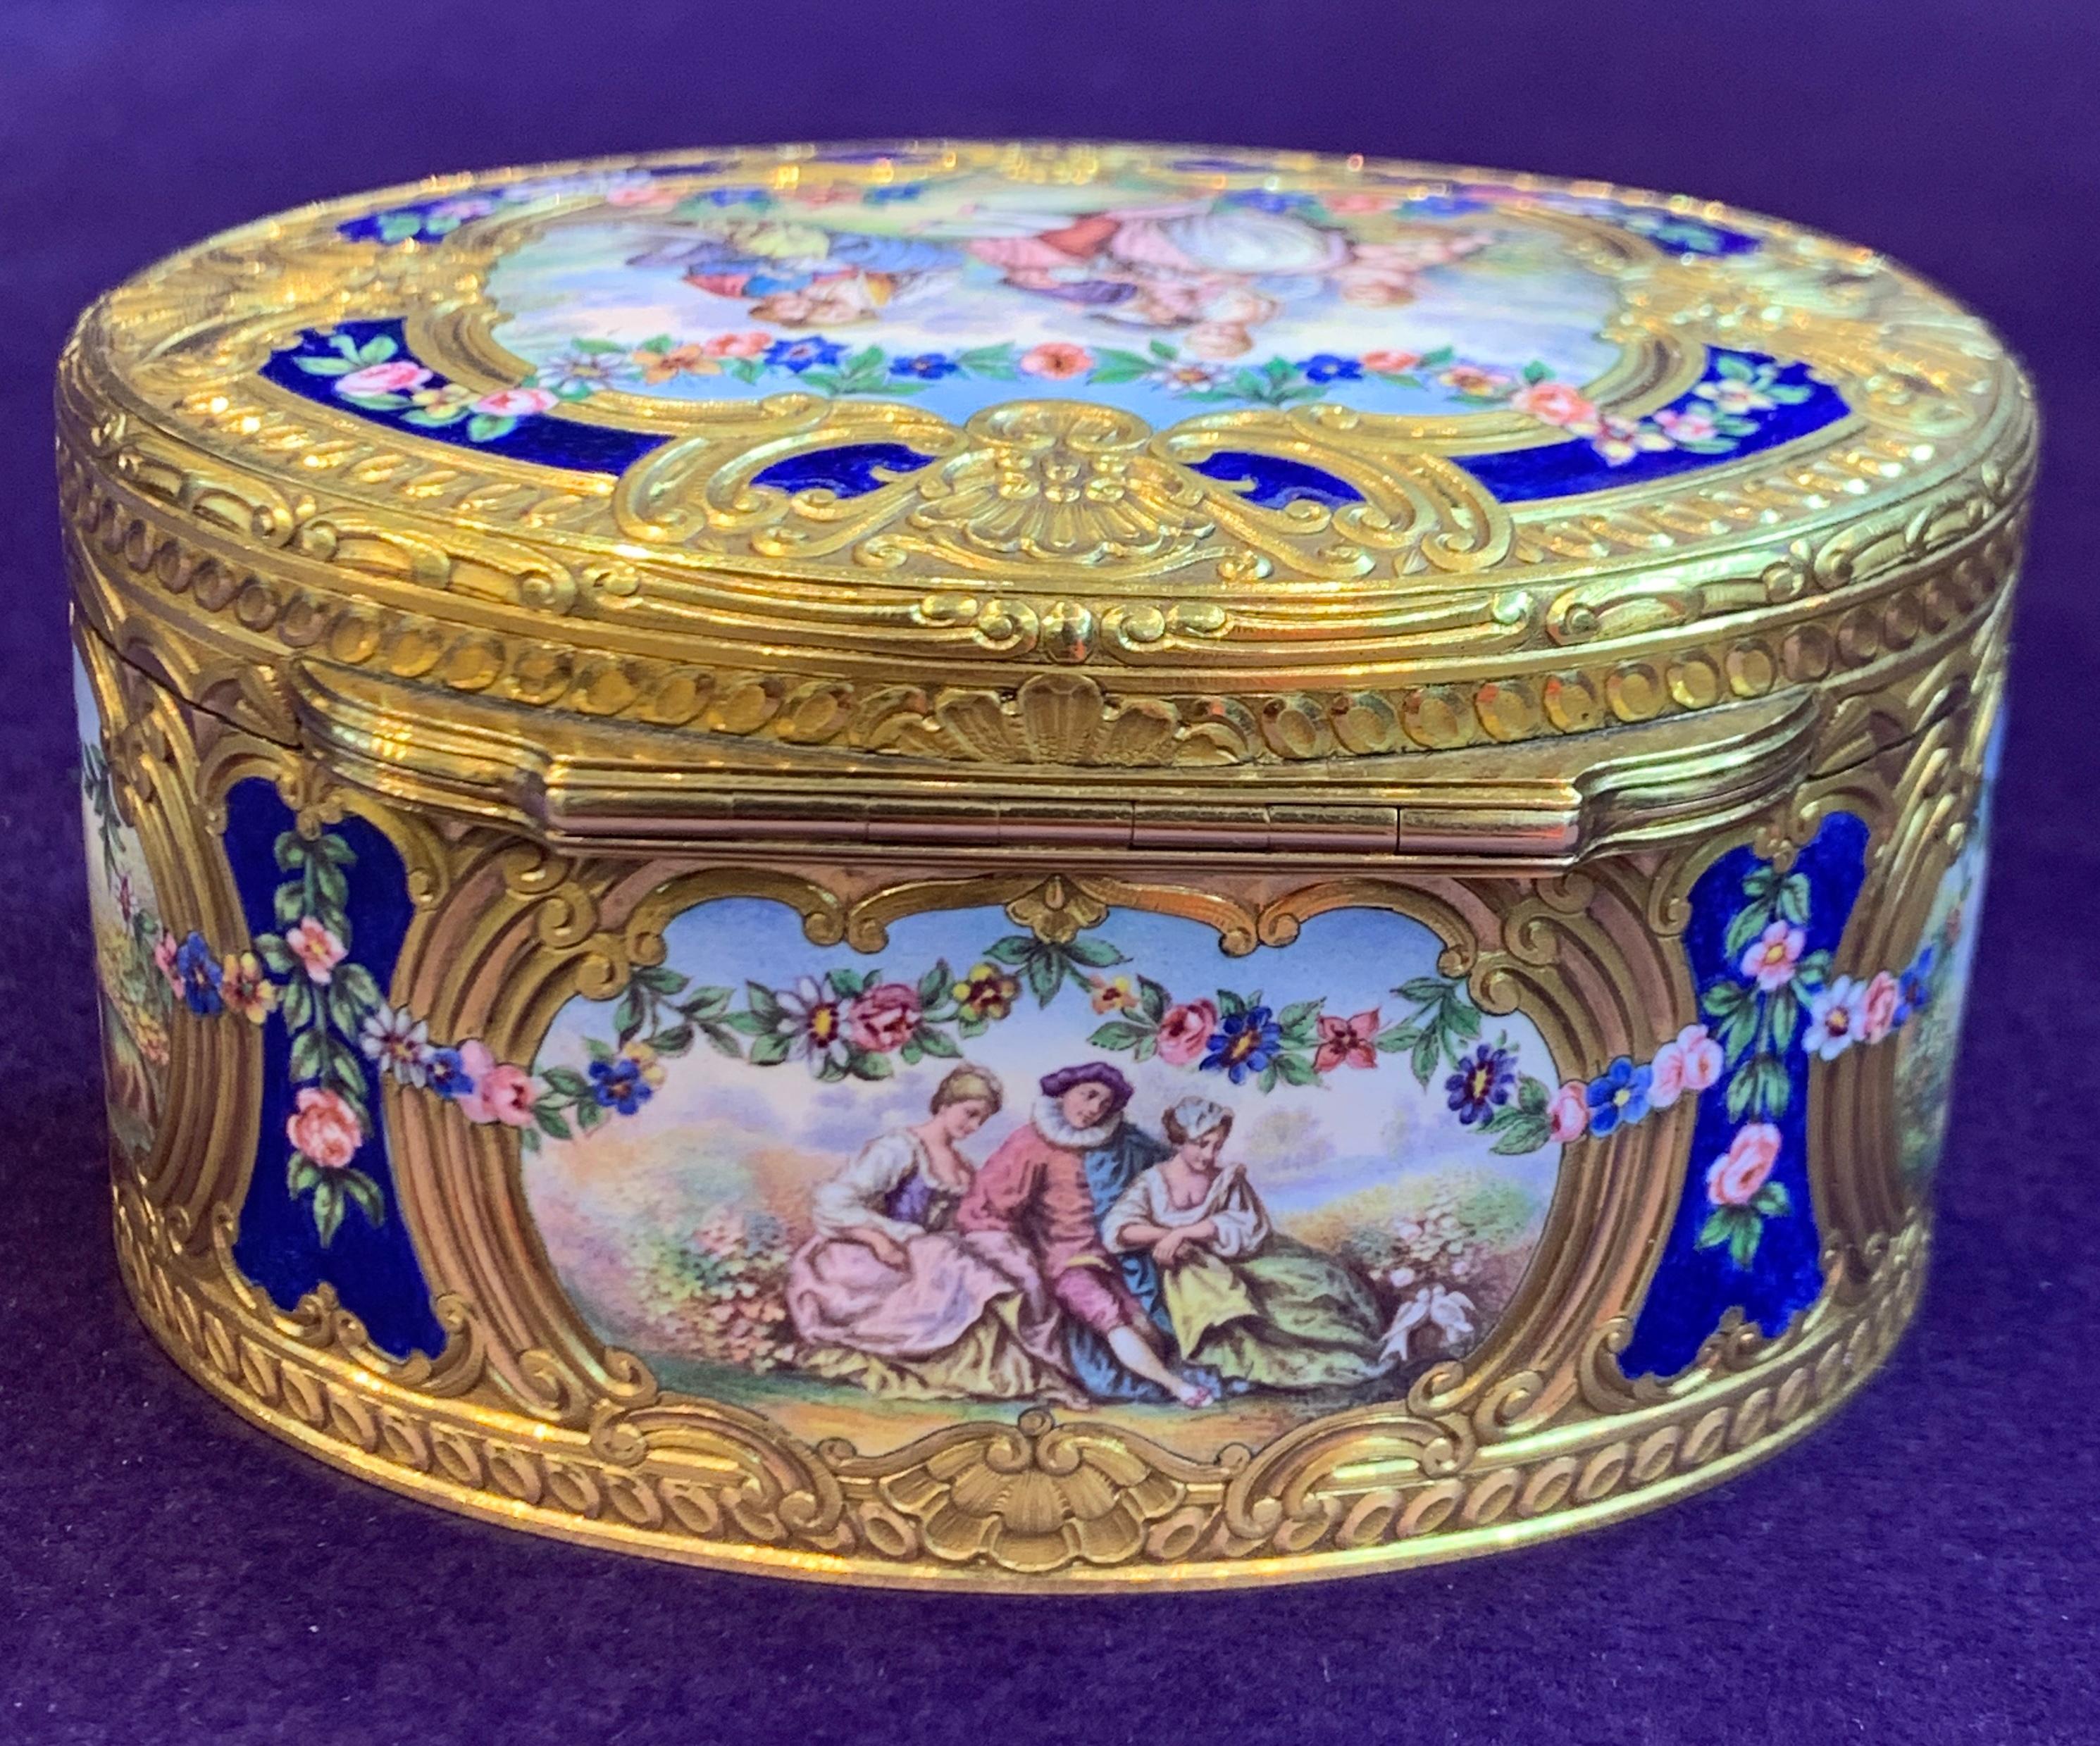 Gold Enamel  Antique Snuff Box
Measurements: 1.75” long,  3.75” wide,   9.5” inches in diameter
223.2 Grams
